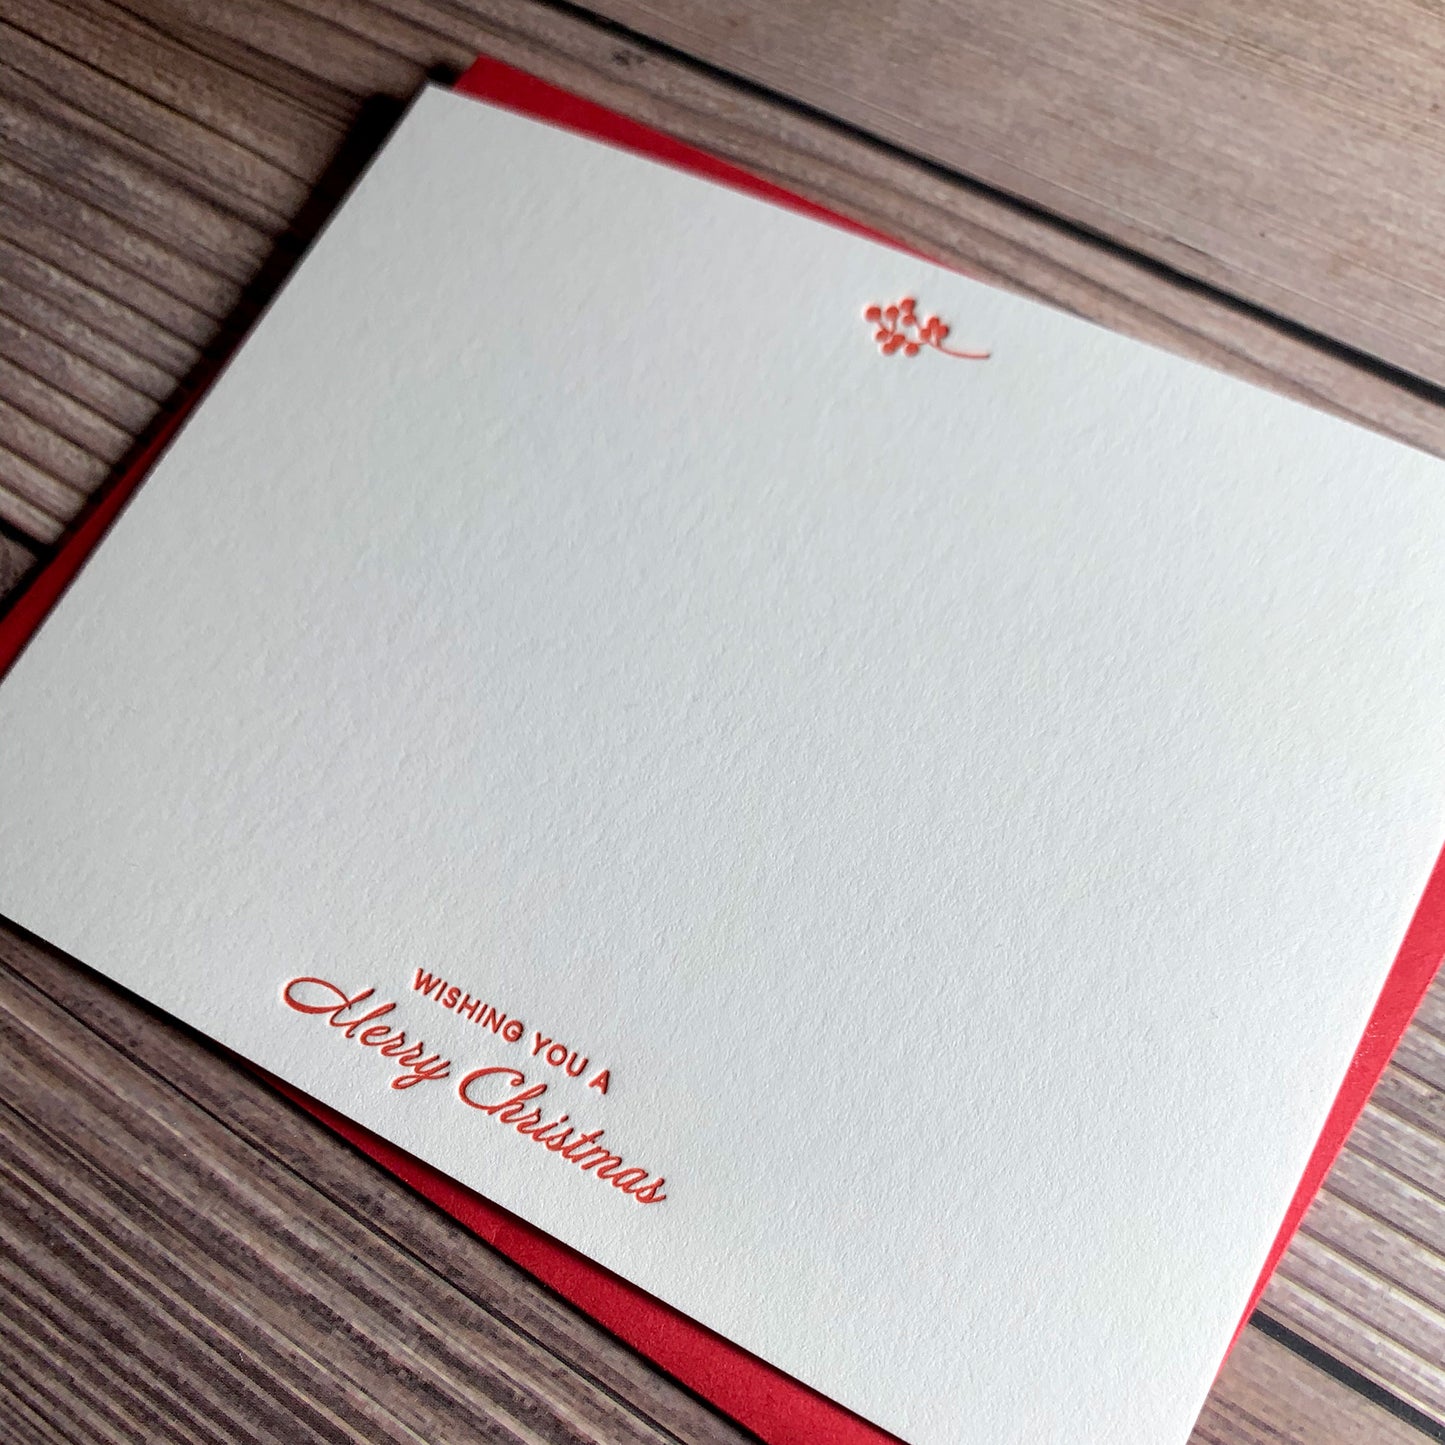 Christmas Berries Note Card, Wishing you a Merry Christmas, Letterpress printed, view shows letterpress impression, includes red envelope